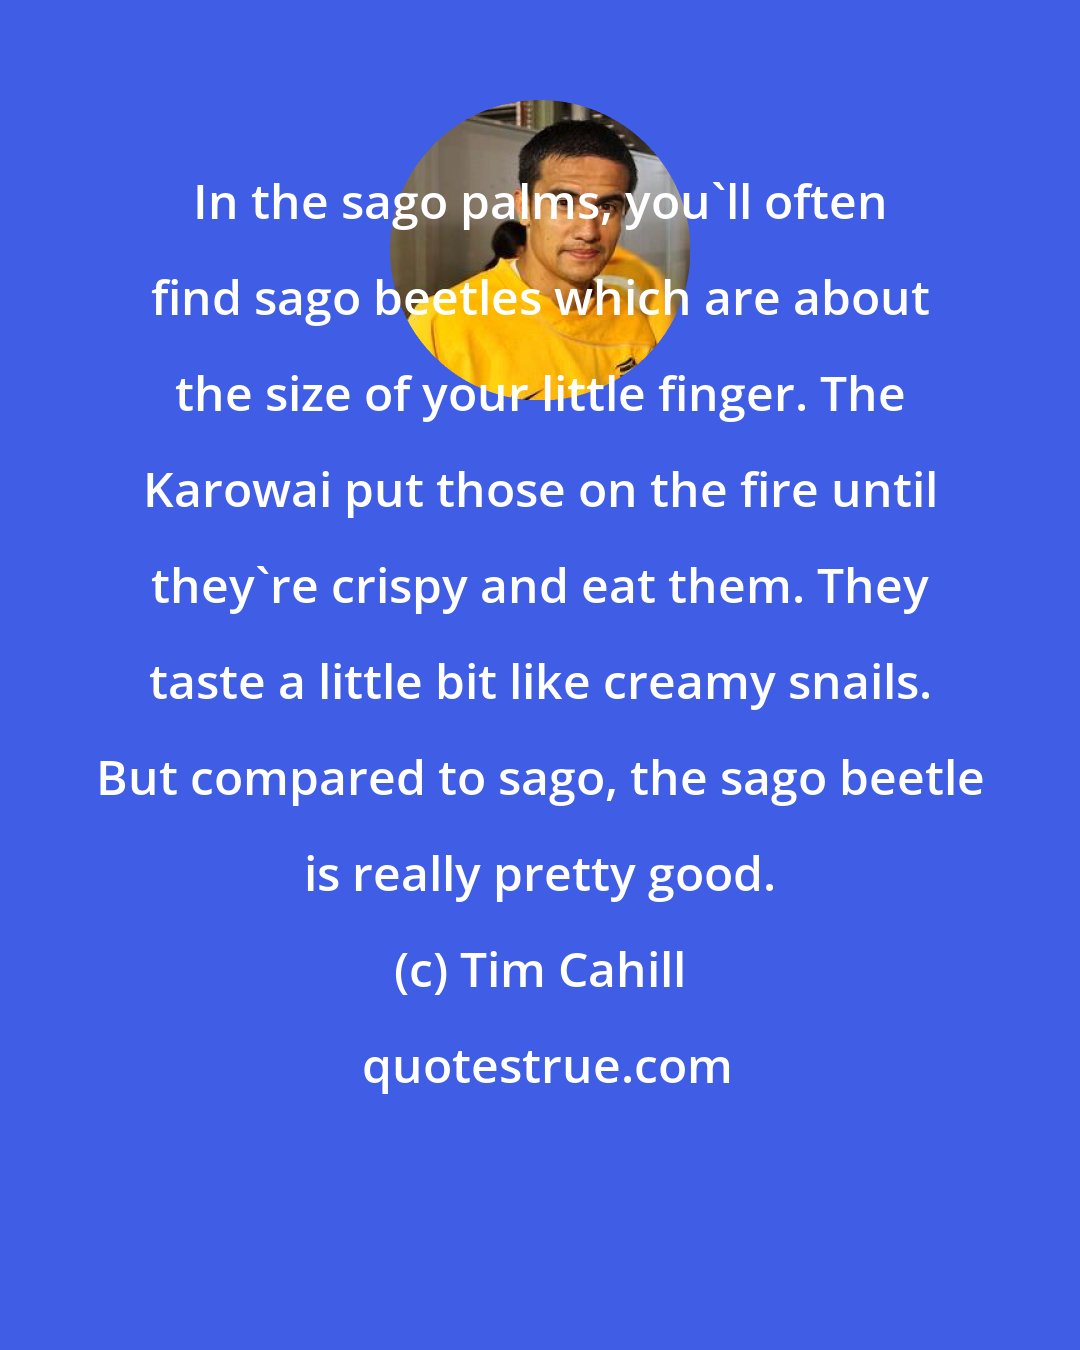 Tim Cahill: In the sago palms, you'll often find sago beetles which are about the size of your little finger. The Karowai put those on the fire until they're crispy and eat them. They taste a little bit like creamy snails. But compared to sago, the sago beetle is really pretty good.